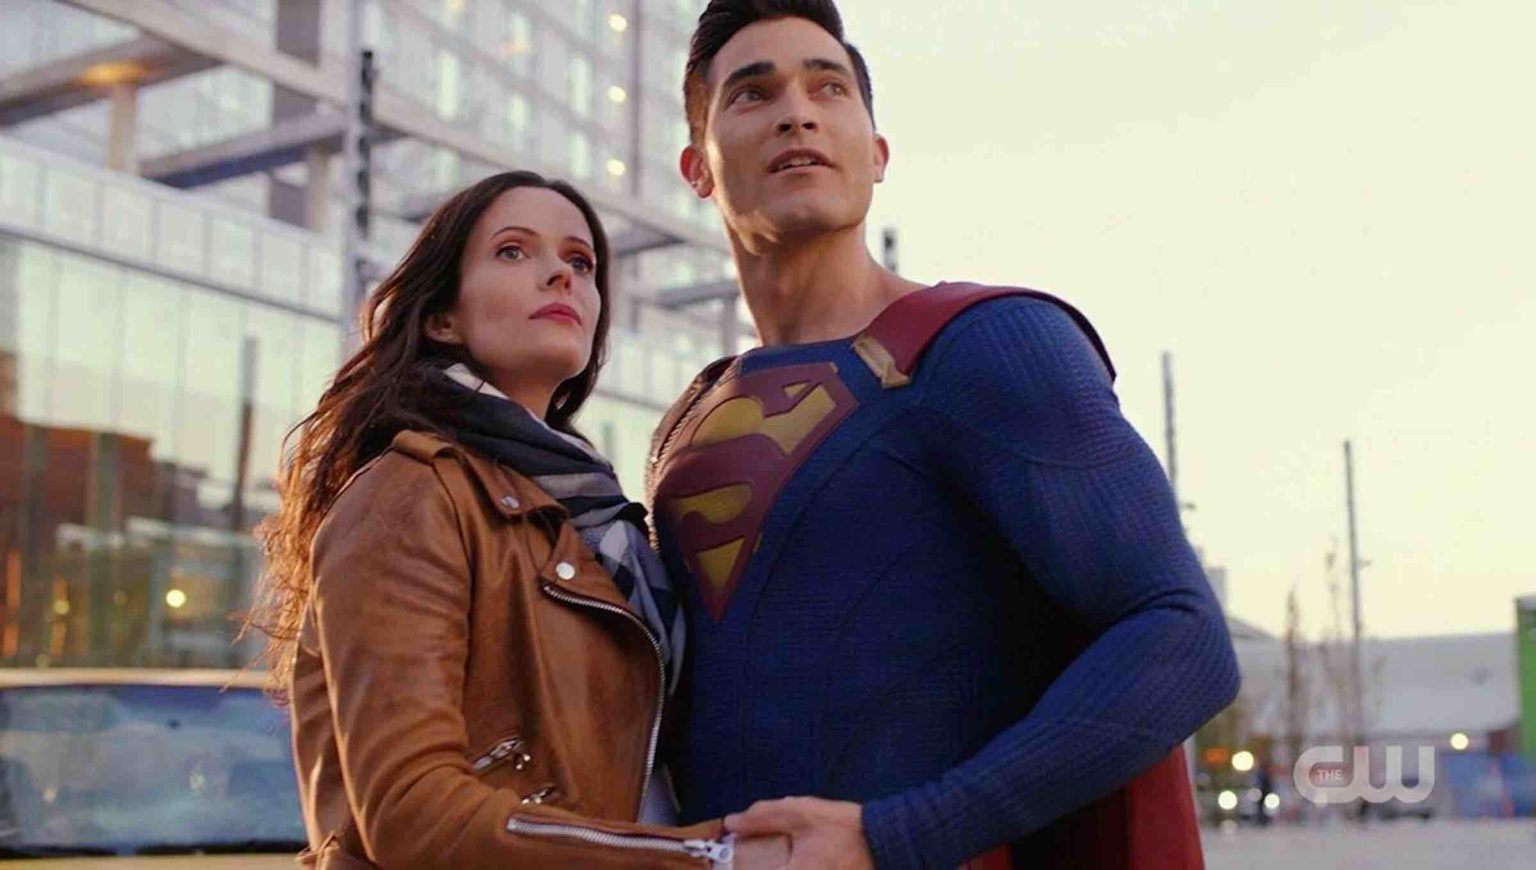 Can 'Superman and Lois' live up to Margot Kidder's legacy? Let’s take a look at some of the best Lois and Clark acts of the past to see their legacy.